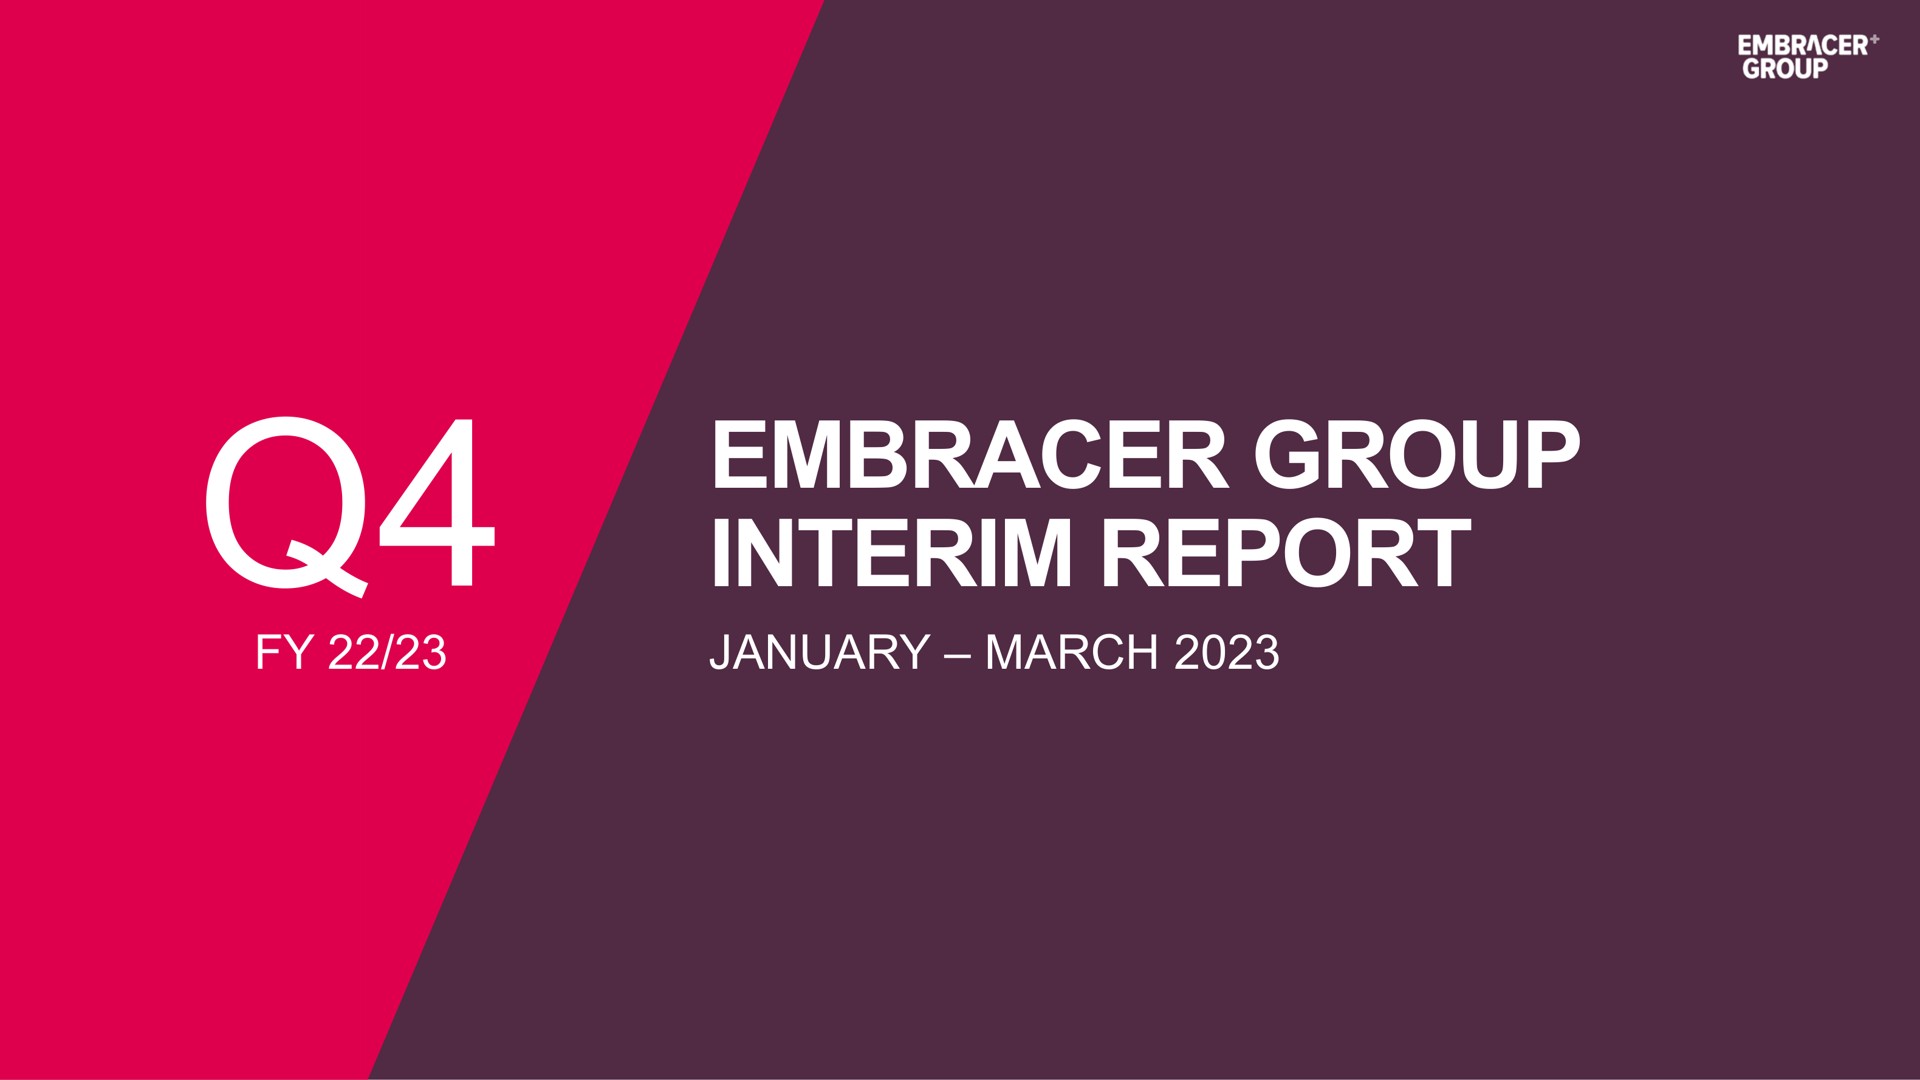 embracer group interim report march | Embracer Group